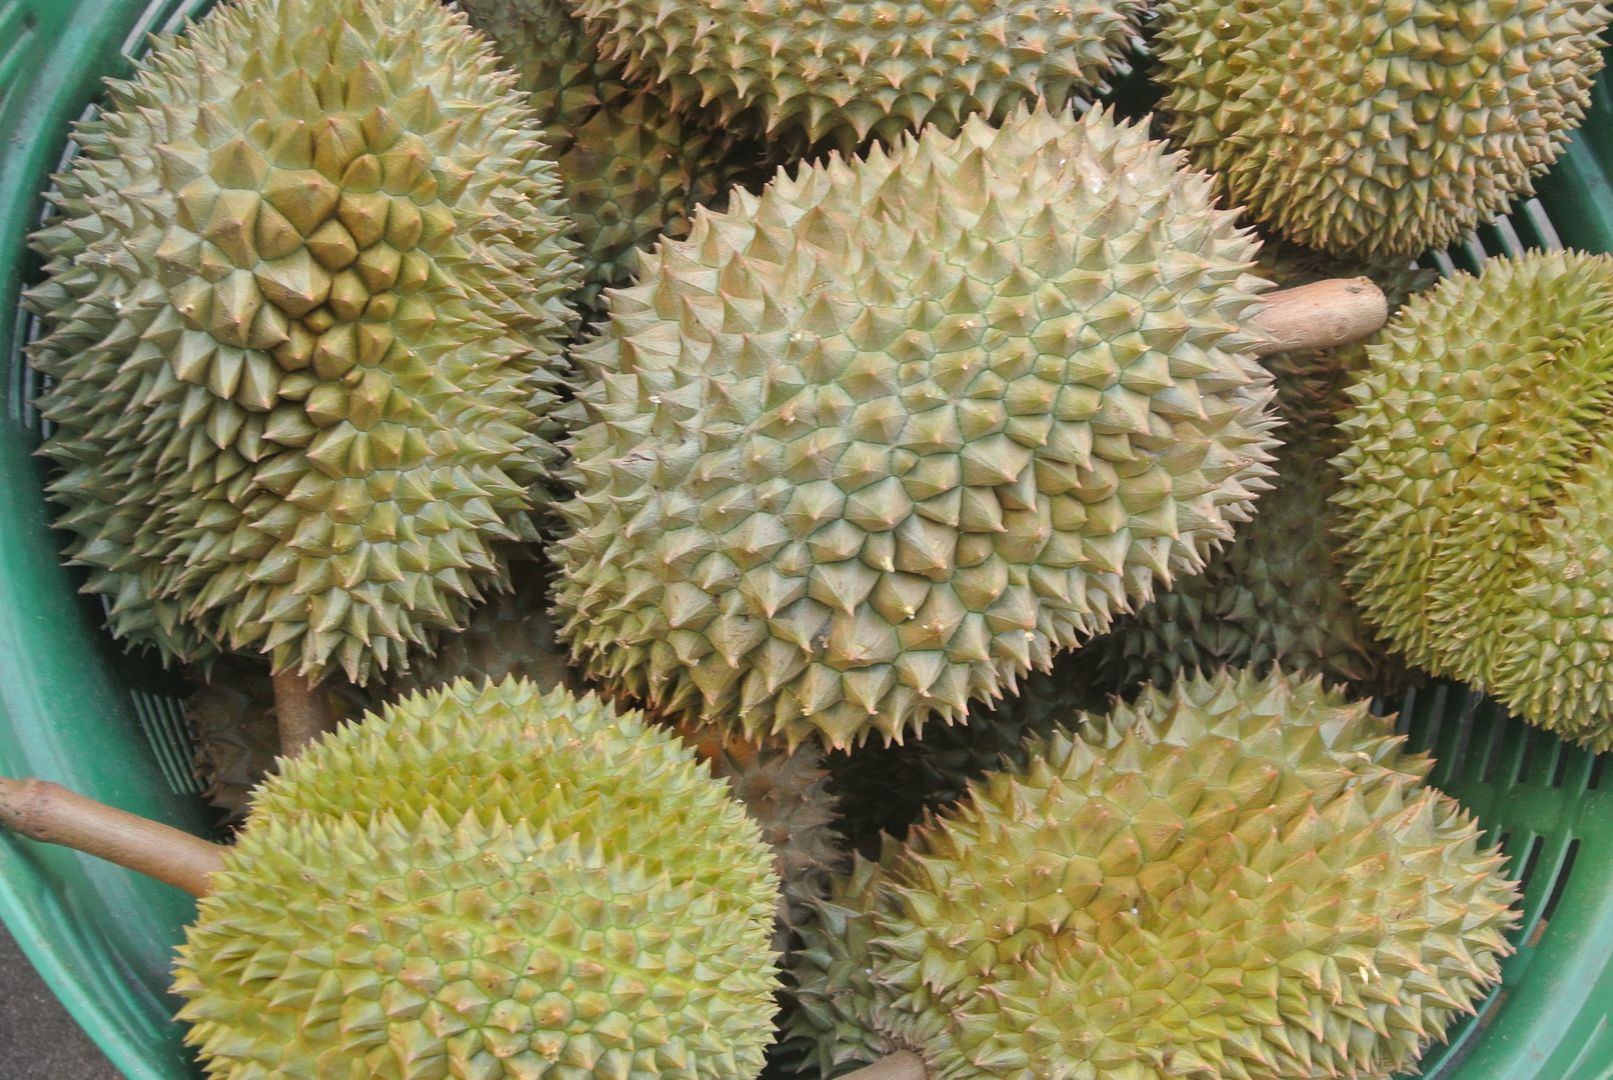 Tropical temptations: exploring the enigmatic Durian